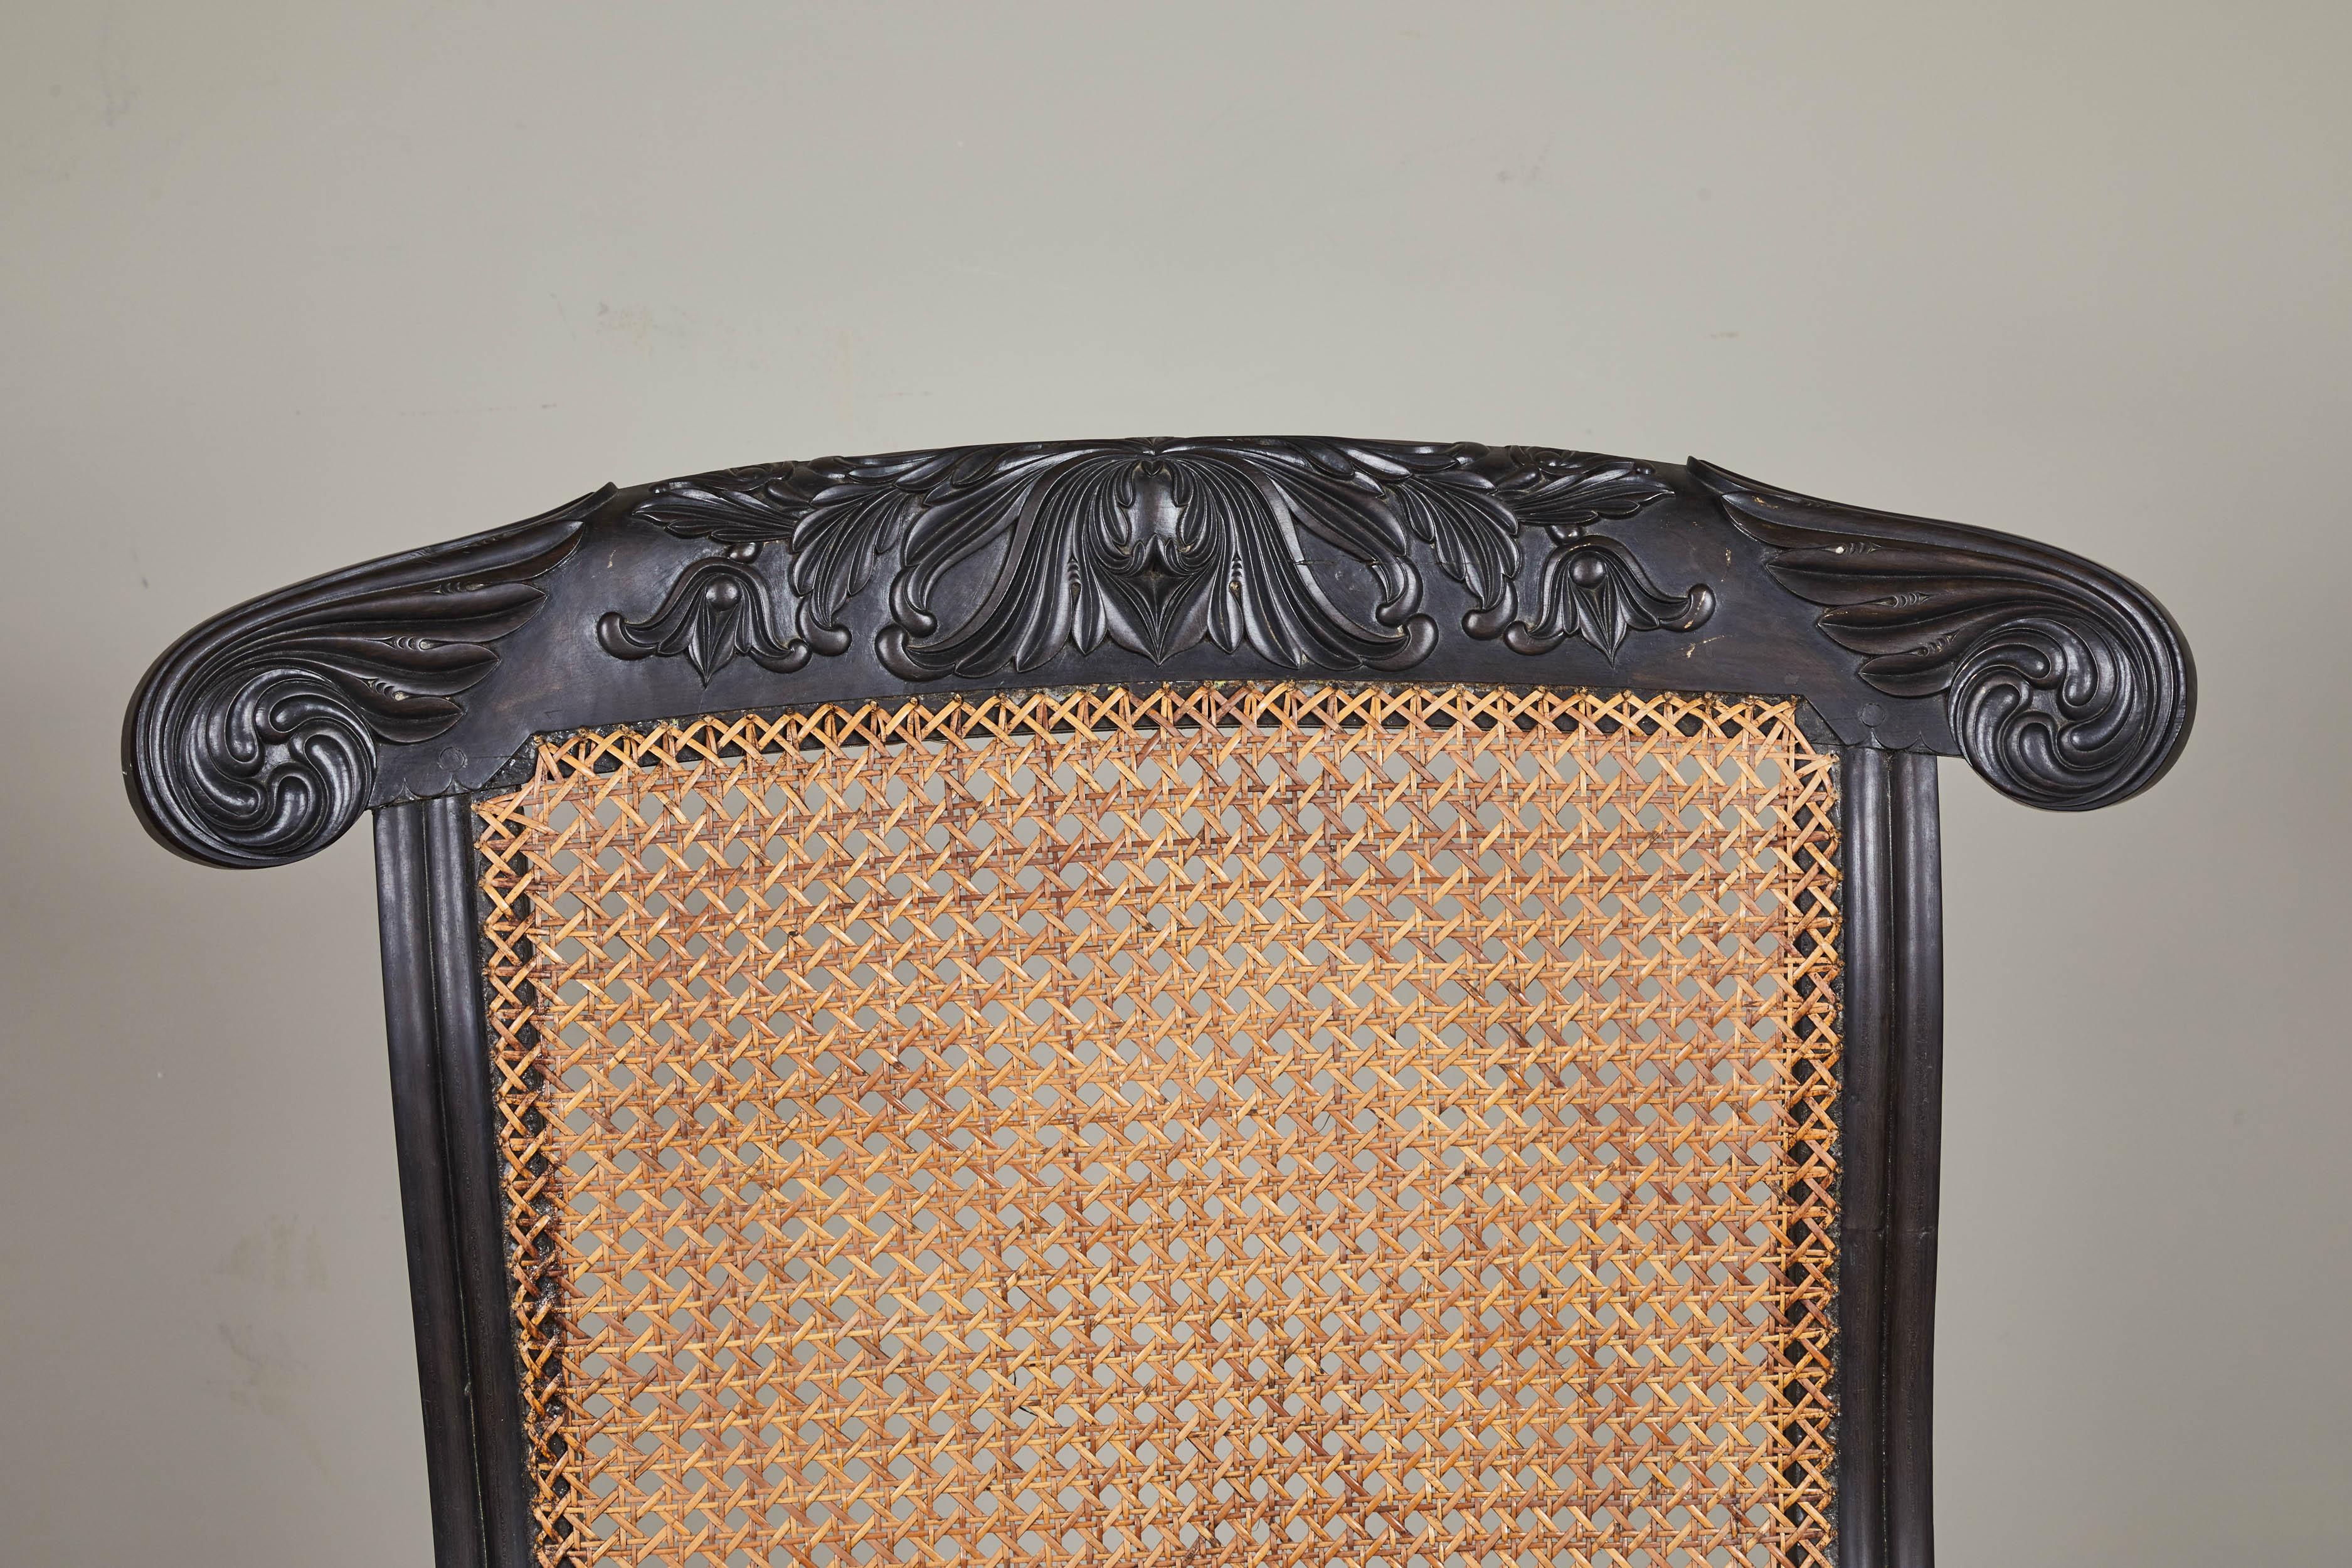 A 19th century British Colonial Ebony chair with carved back and feet. Caned seat with scrolled arms.